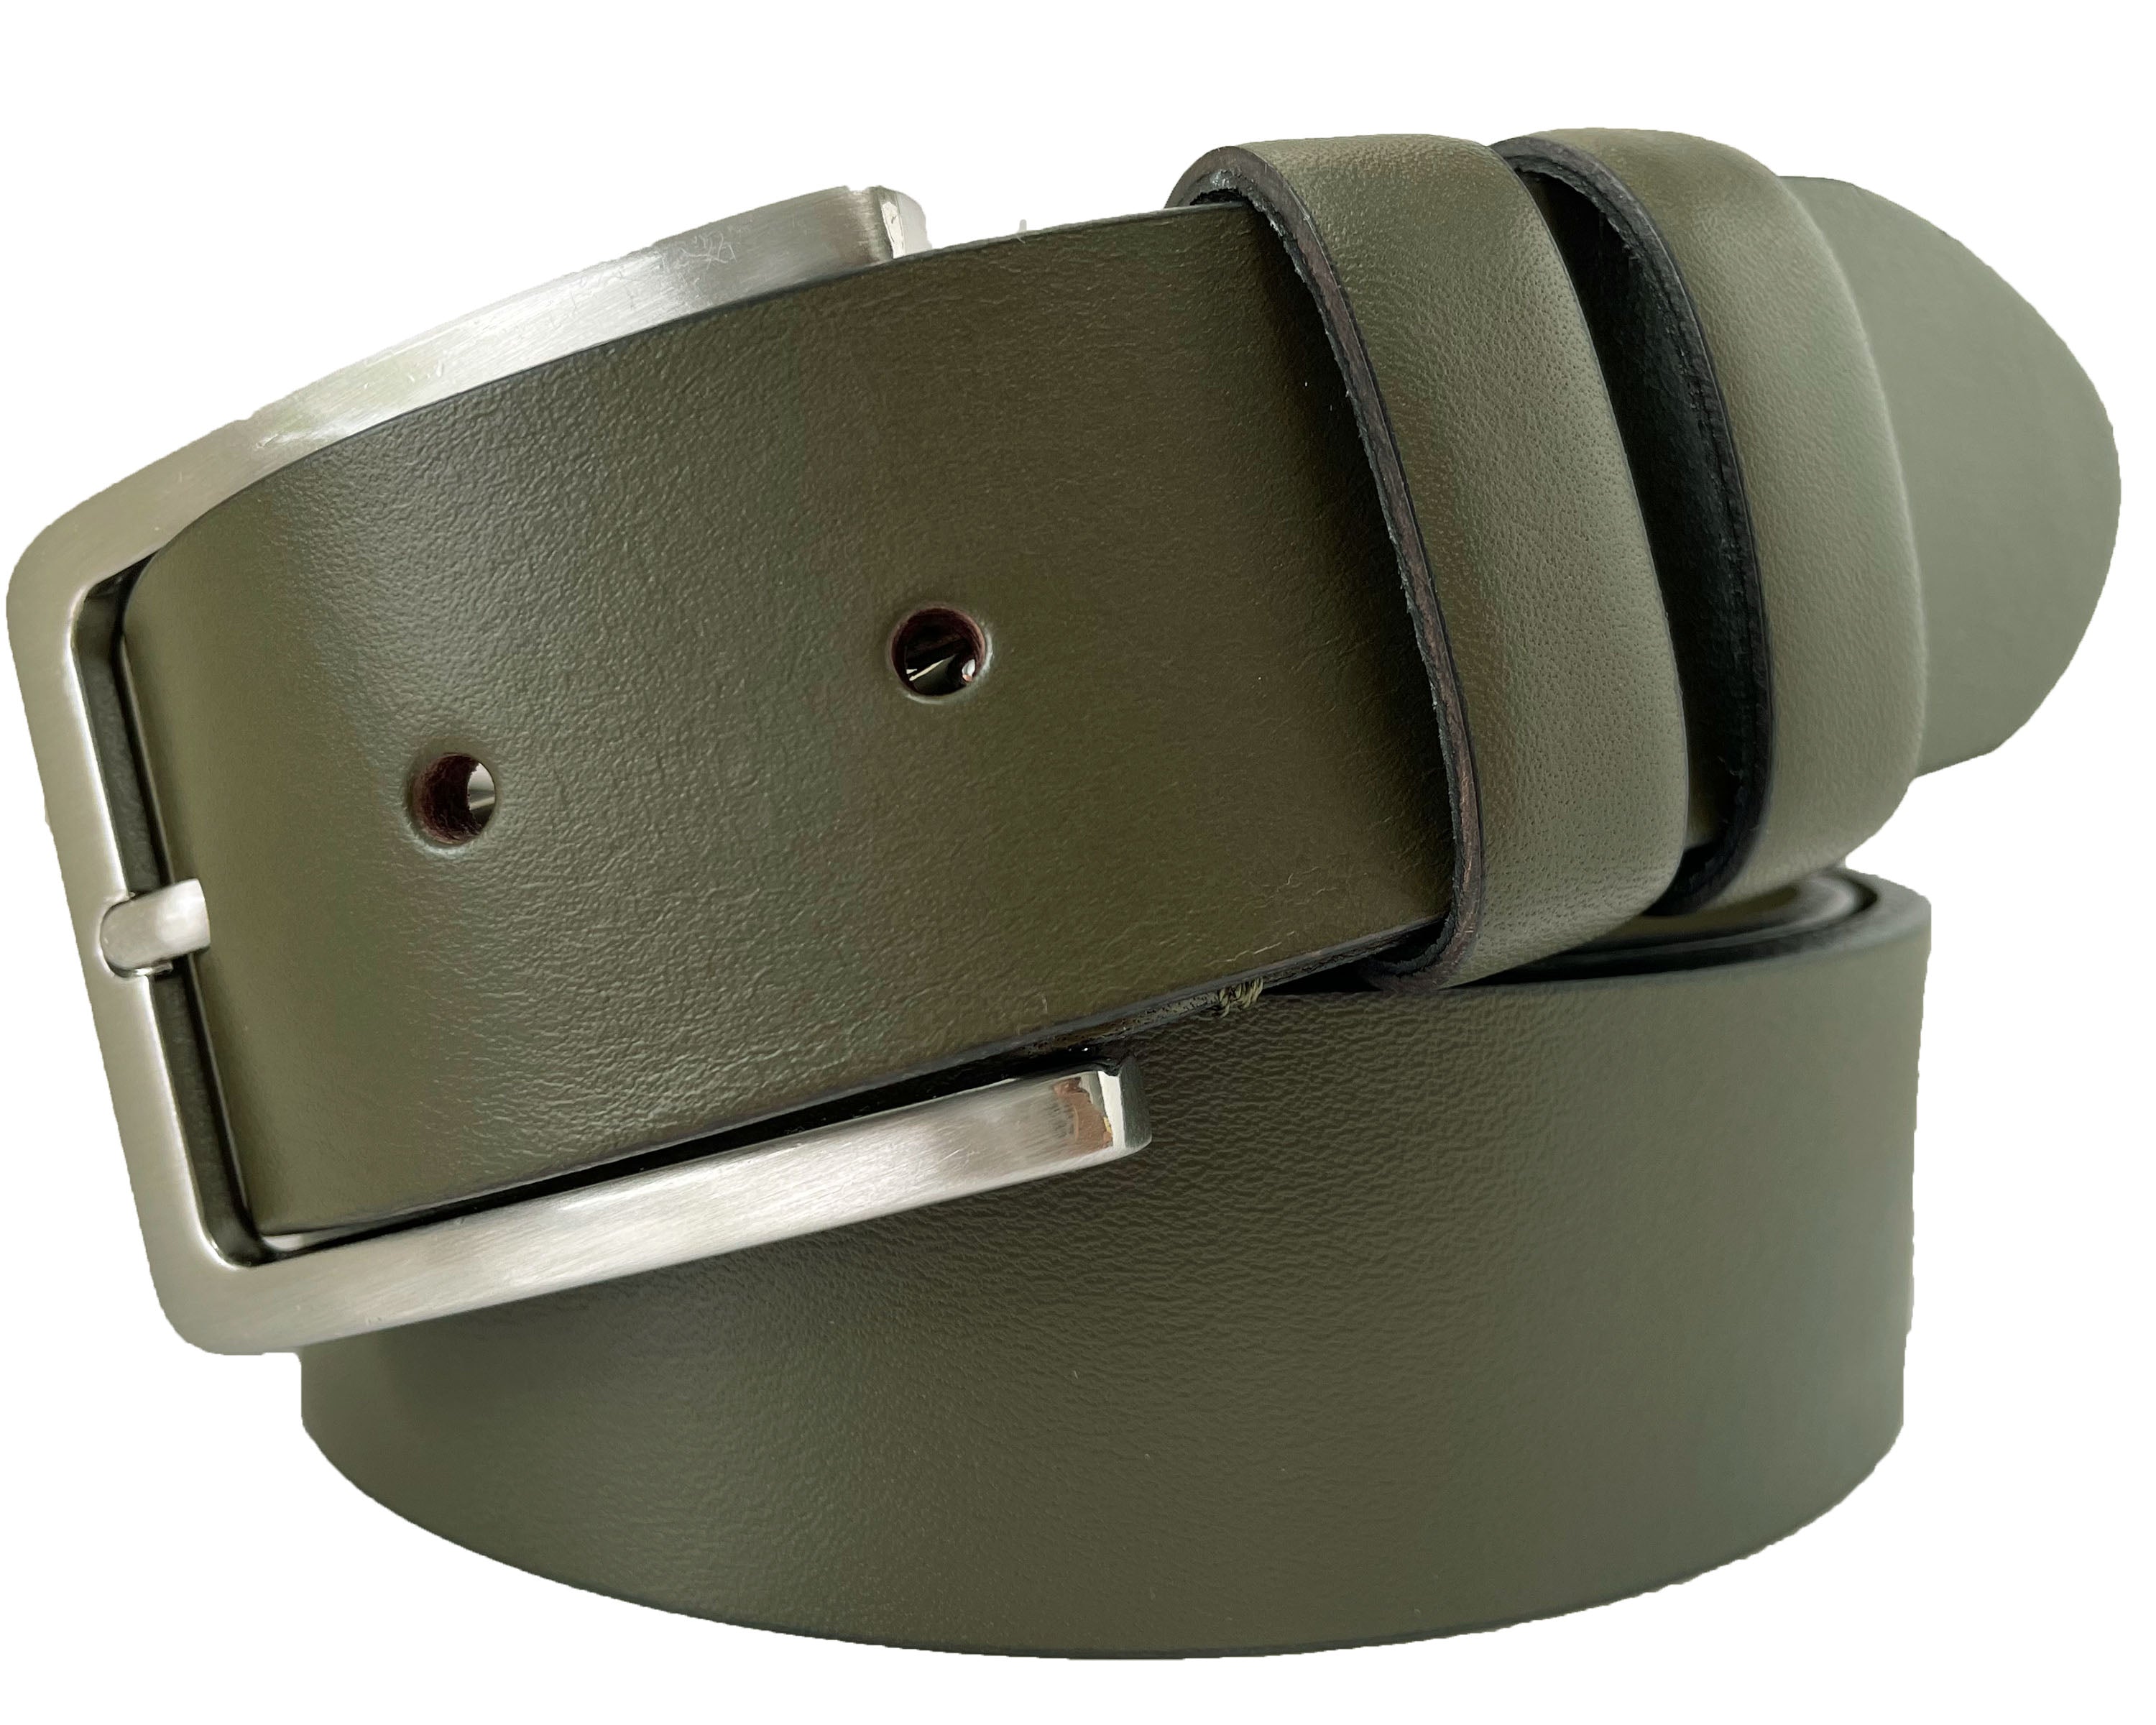 MILITARY GREEN 40MM CLASSIC HIDE LEATHER BELT